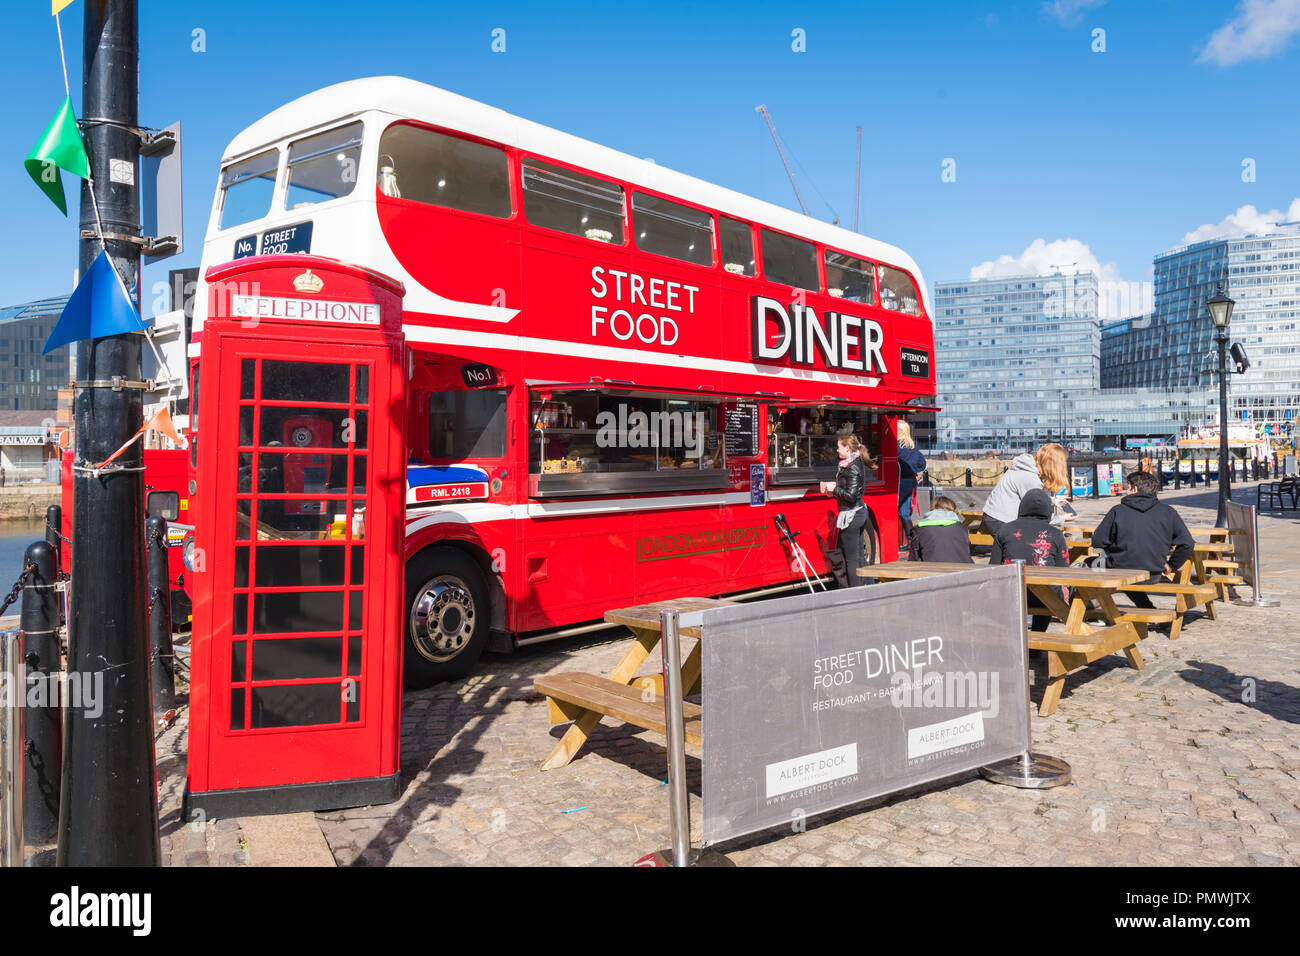 Liverpool Canning Dock double decker London Transport bus Street Food Diner restaurant bar takeaway takeout wooden tables benches red phone book Stock Photo